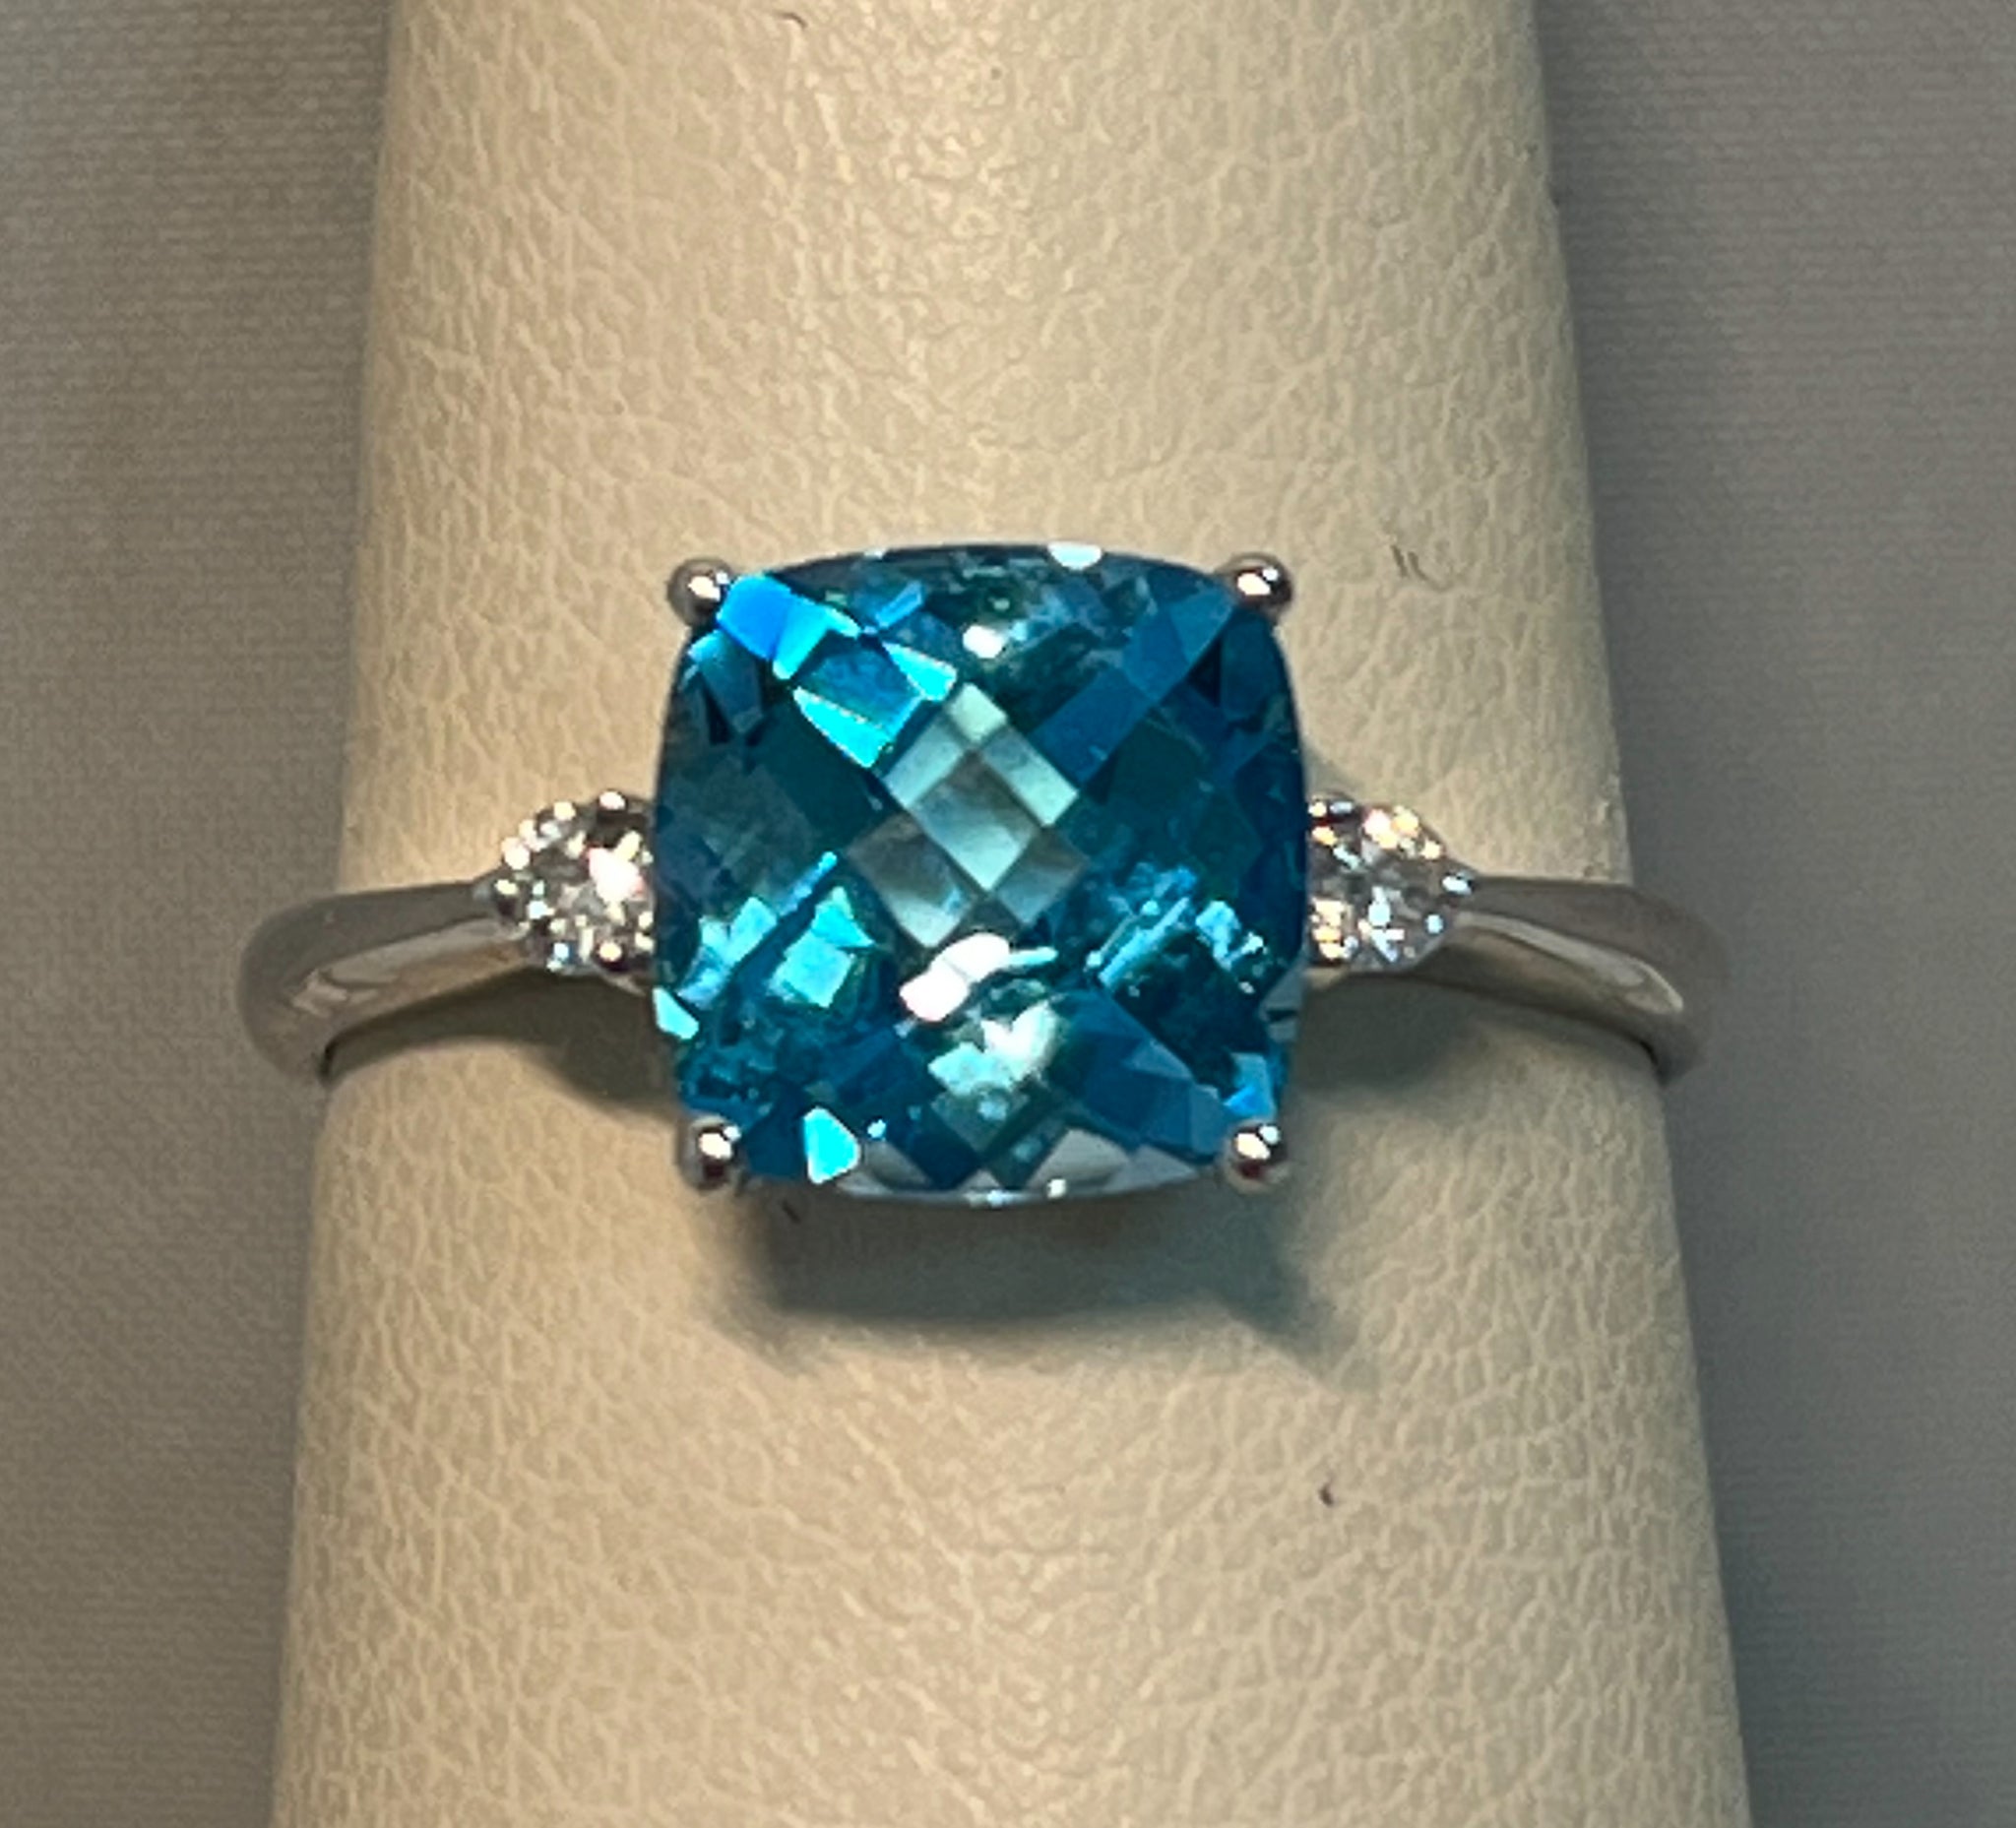 Blue Topaz Cushion Cut Ring in Yellow Gold | New York Jewelers Chicago